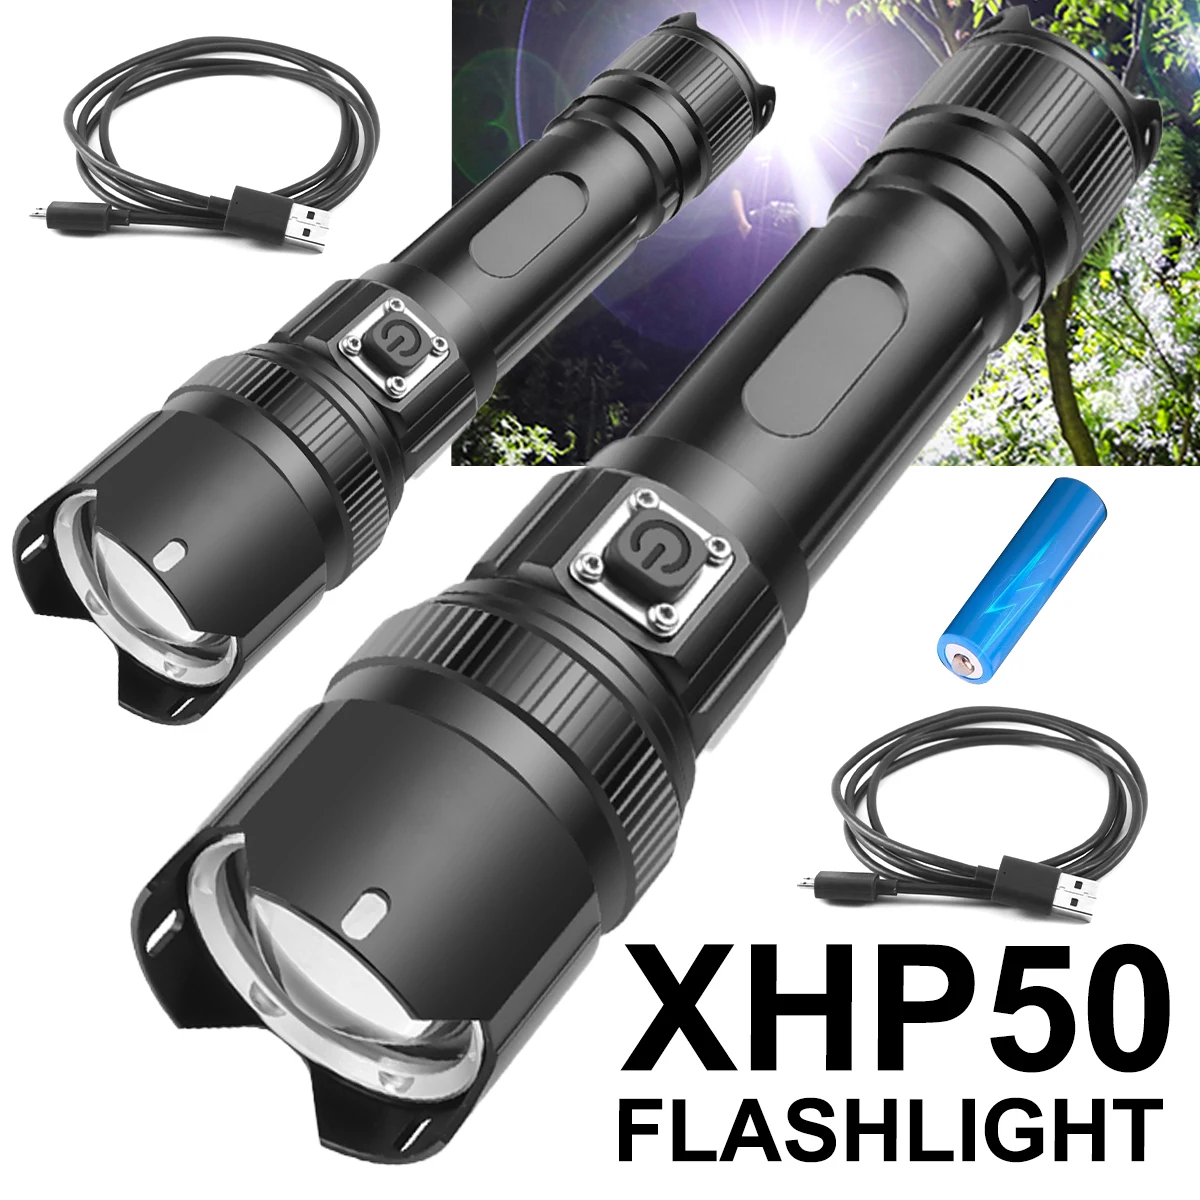 

Rechargeable LED Flashlight XHP50 LED Tactical Flashlight 800-1000 Lumens Zoomable Torch Searchlight IPX4 Emergency Flashlight